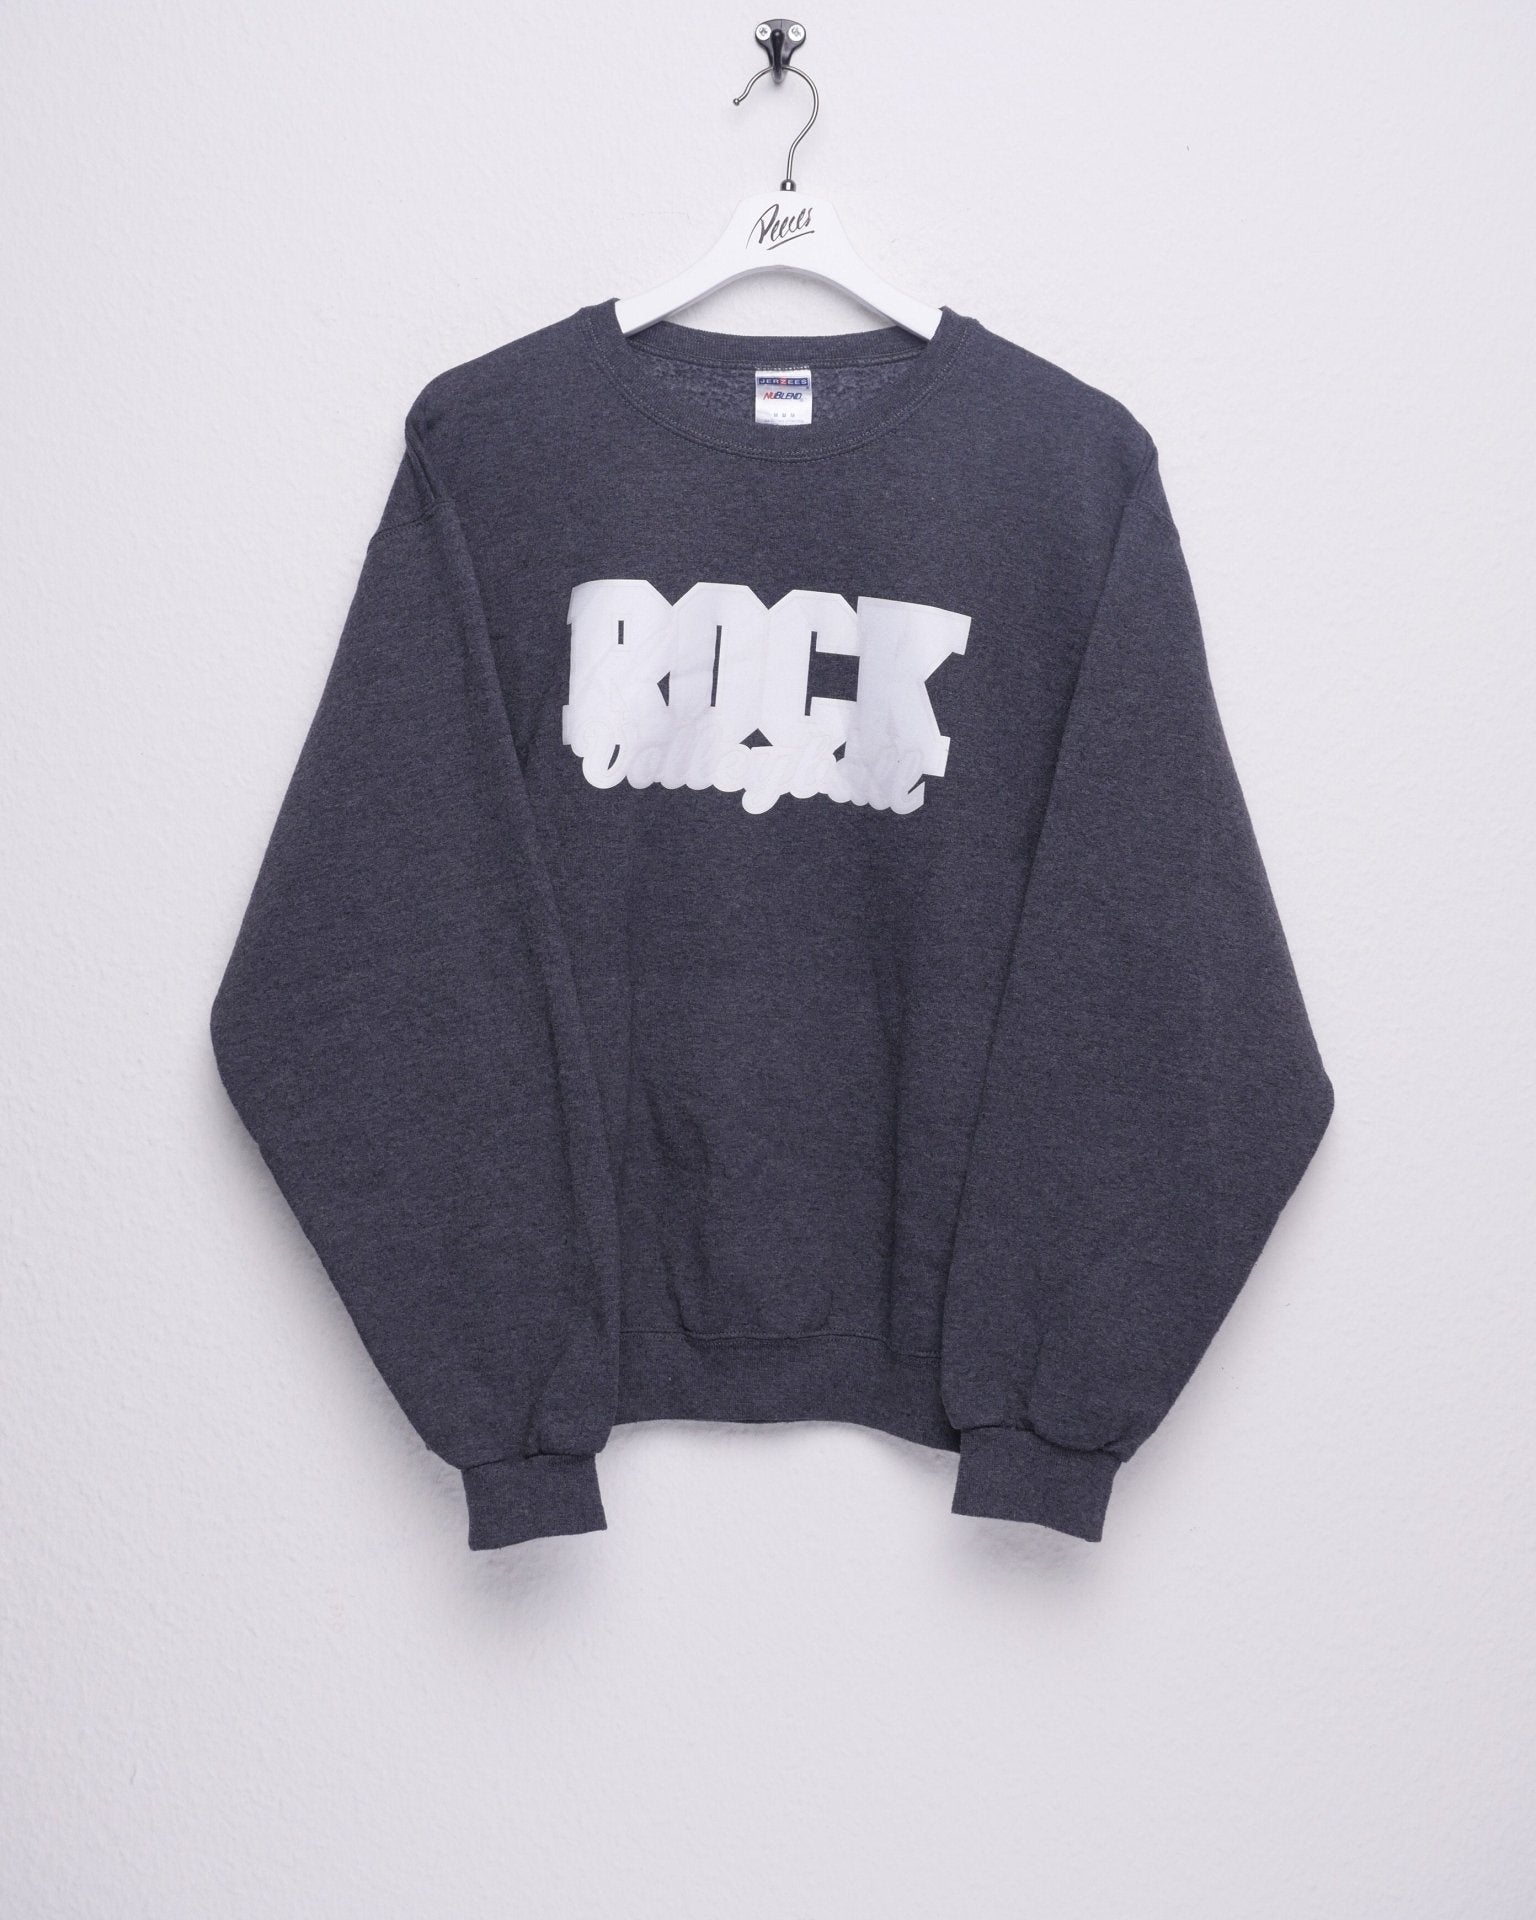 Rock Volleyball printed Spellout grey Sweater - Peeces